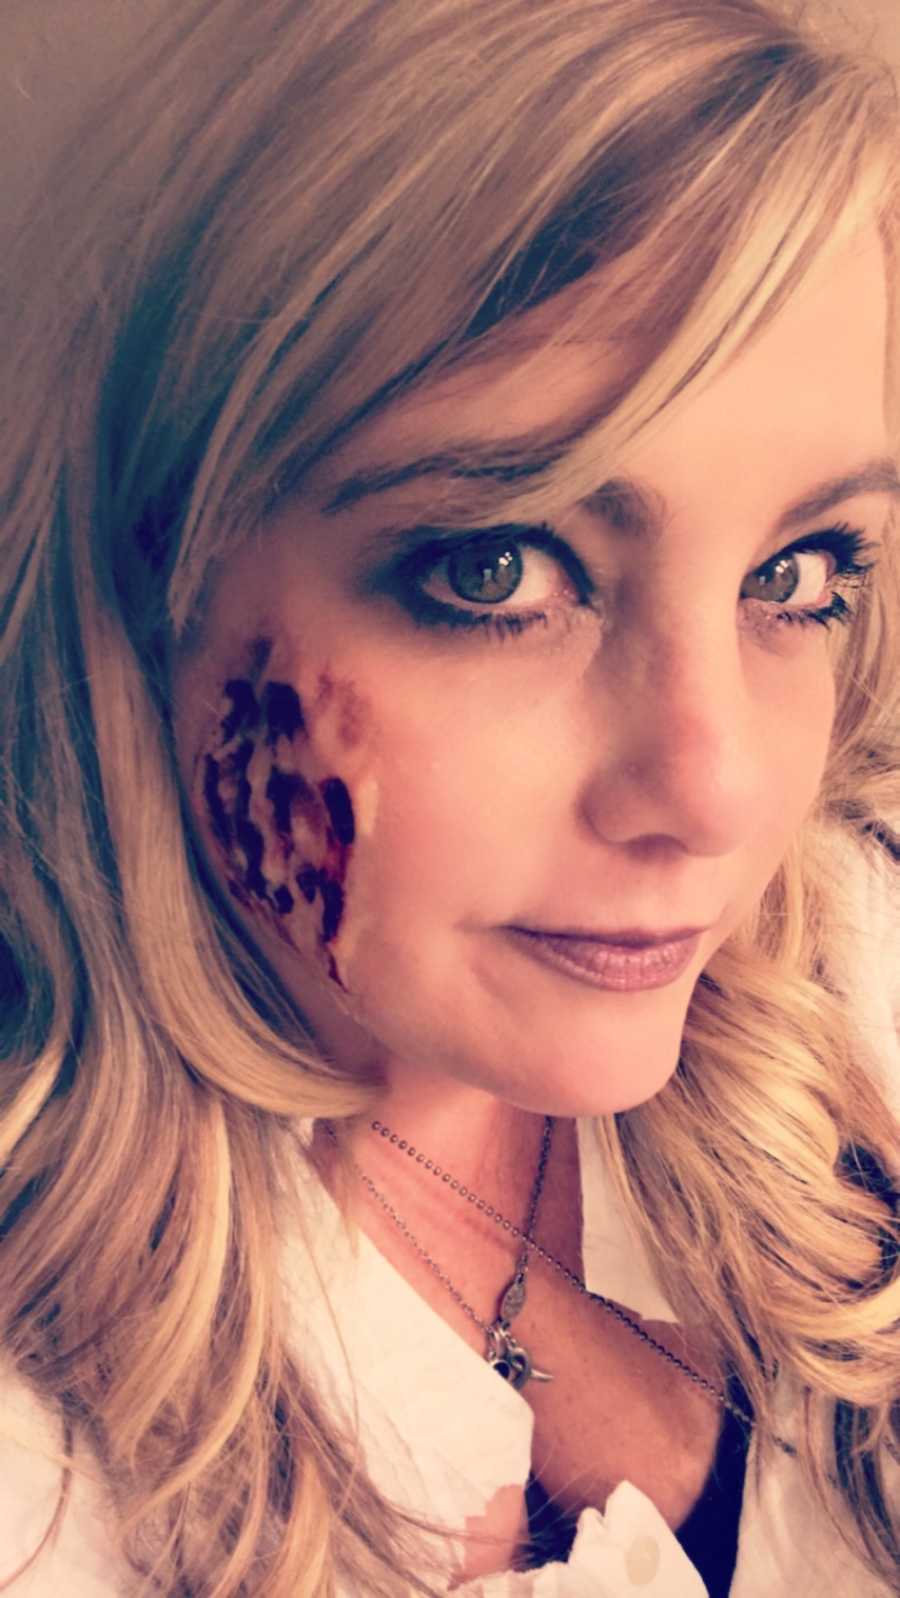 Woman with face painting on for Halloween takes selfie